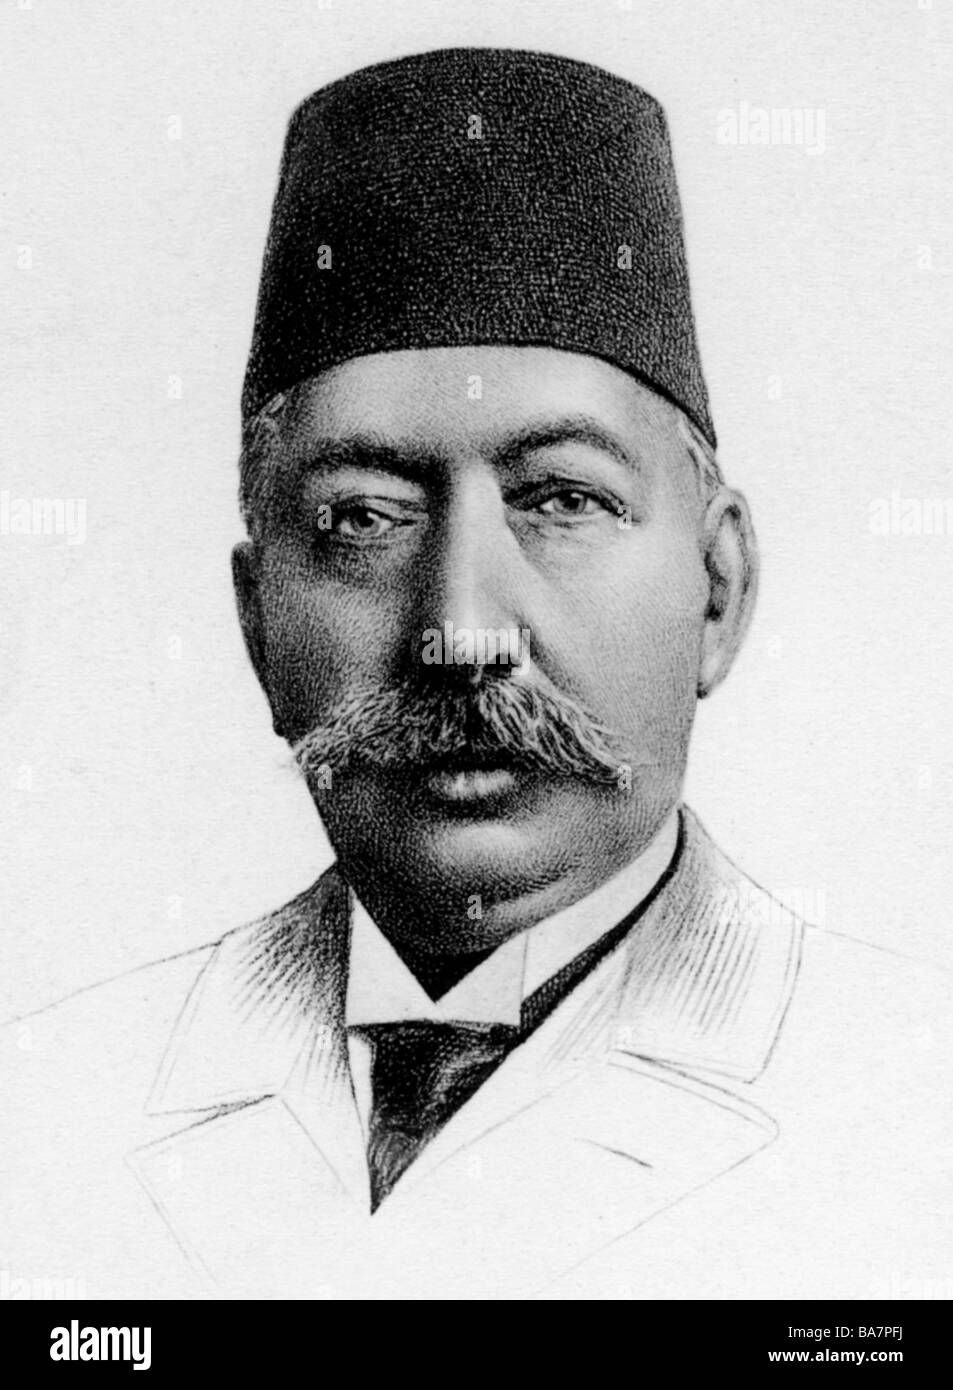 Mehmed V Resad, 2.11.1844 - 3.7.1918, Sultan of the Ottoman Empire 27.4.1909 - 3.7.1918, portrait, picture postcard after drawing, circa 1914, Stock Photo